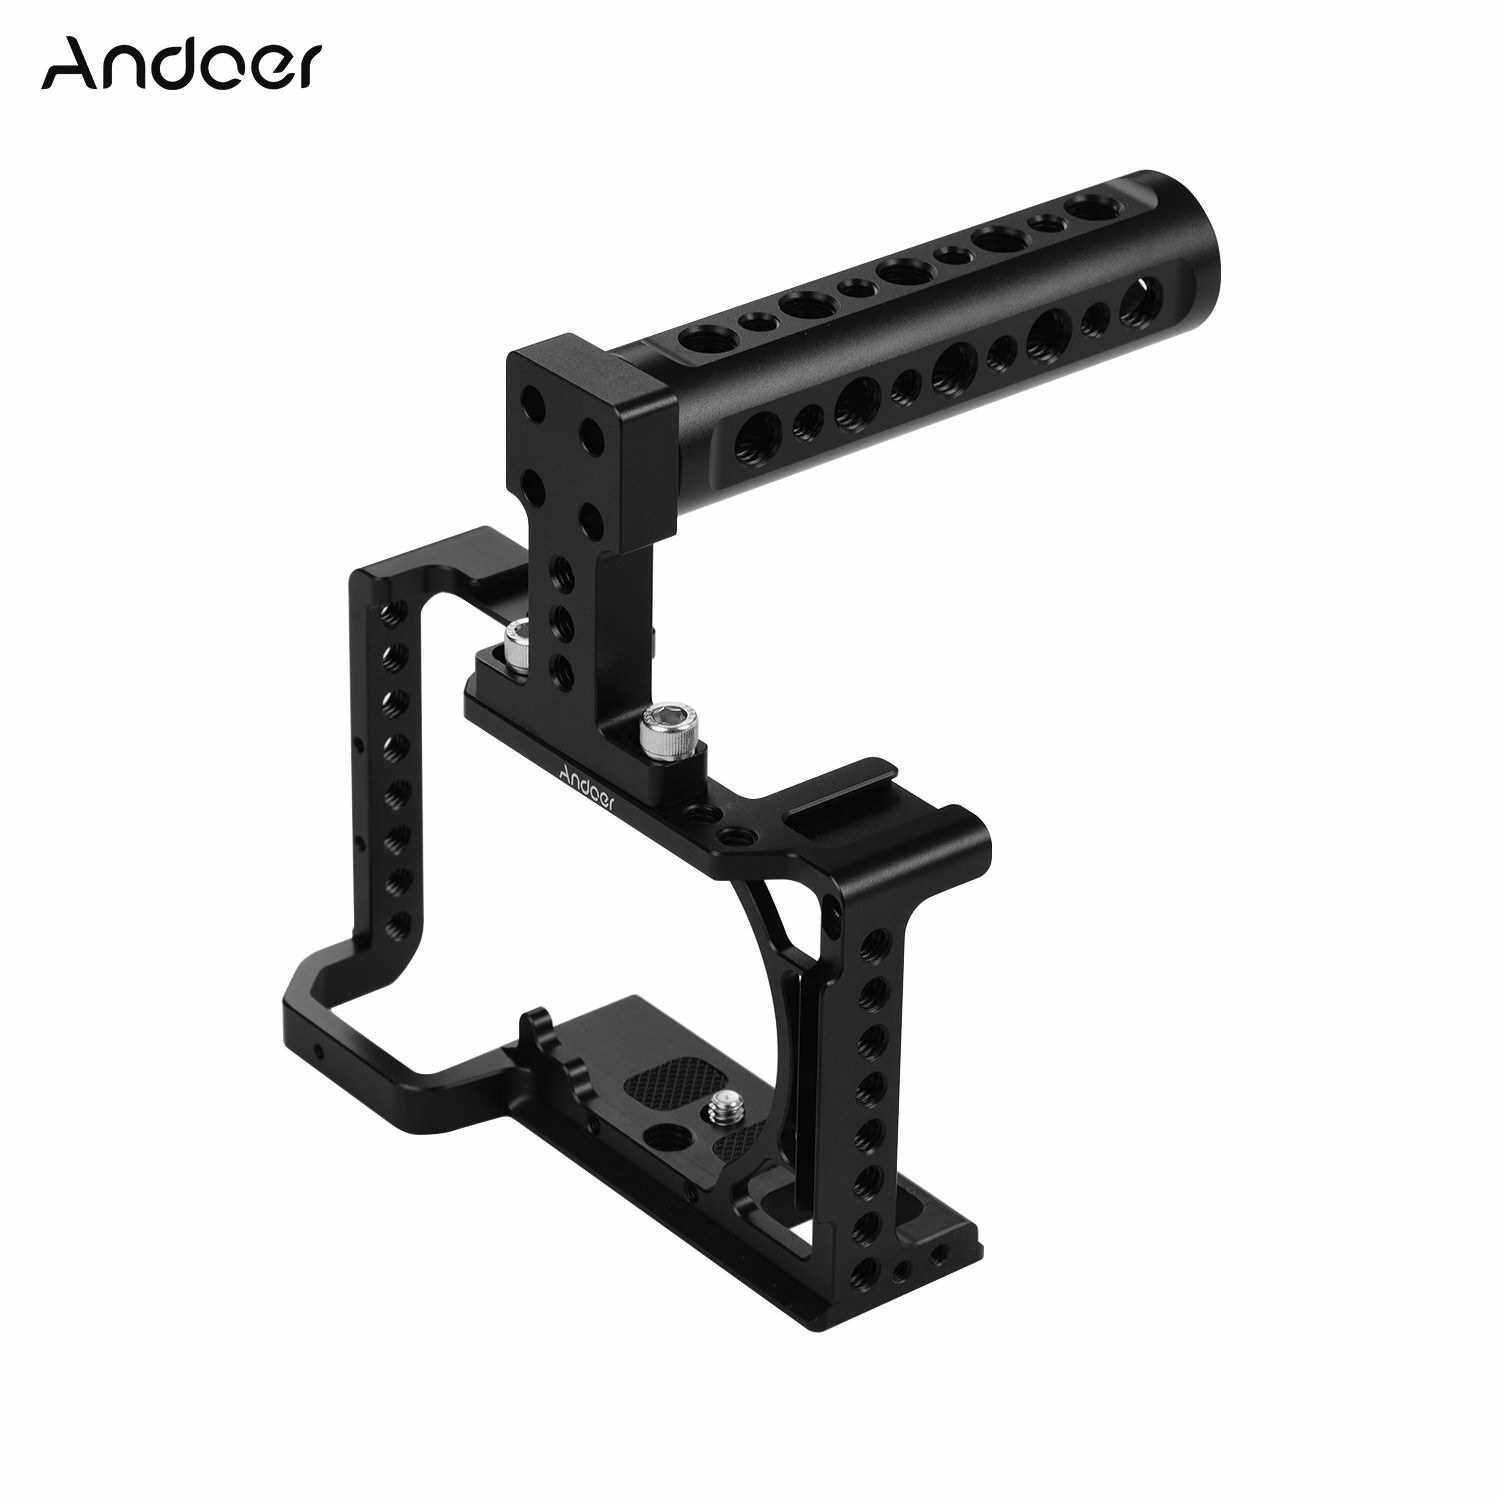 Andoer Professional Photography Camera Cage Kit Aluminum Alloy Camera Case Bracket with 1/4" 3/8" Extension Thread Holes Cold Shoe Mount Metal Handle Mini Wrench Compatible with Sony A6600,A6500,A6400,A6300,A6000 (Standard)